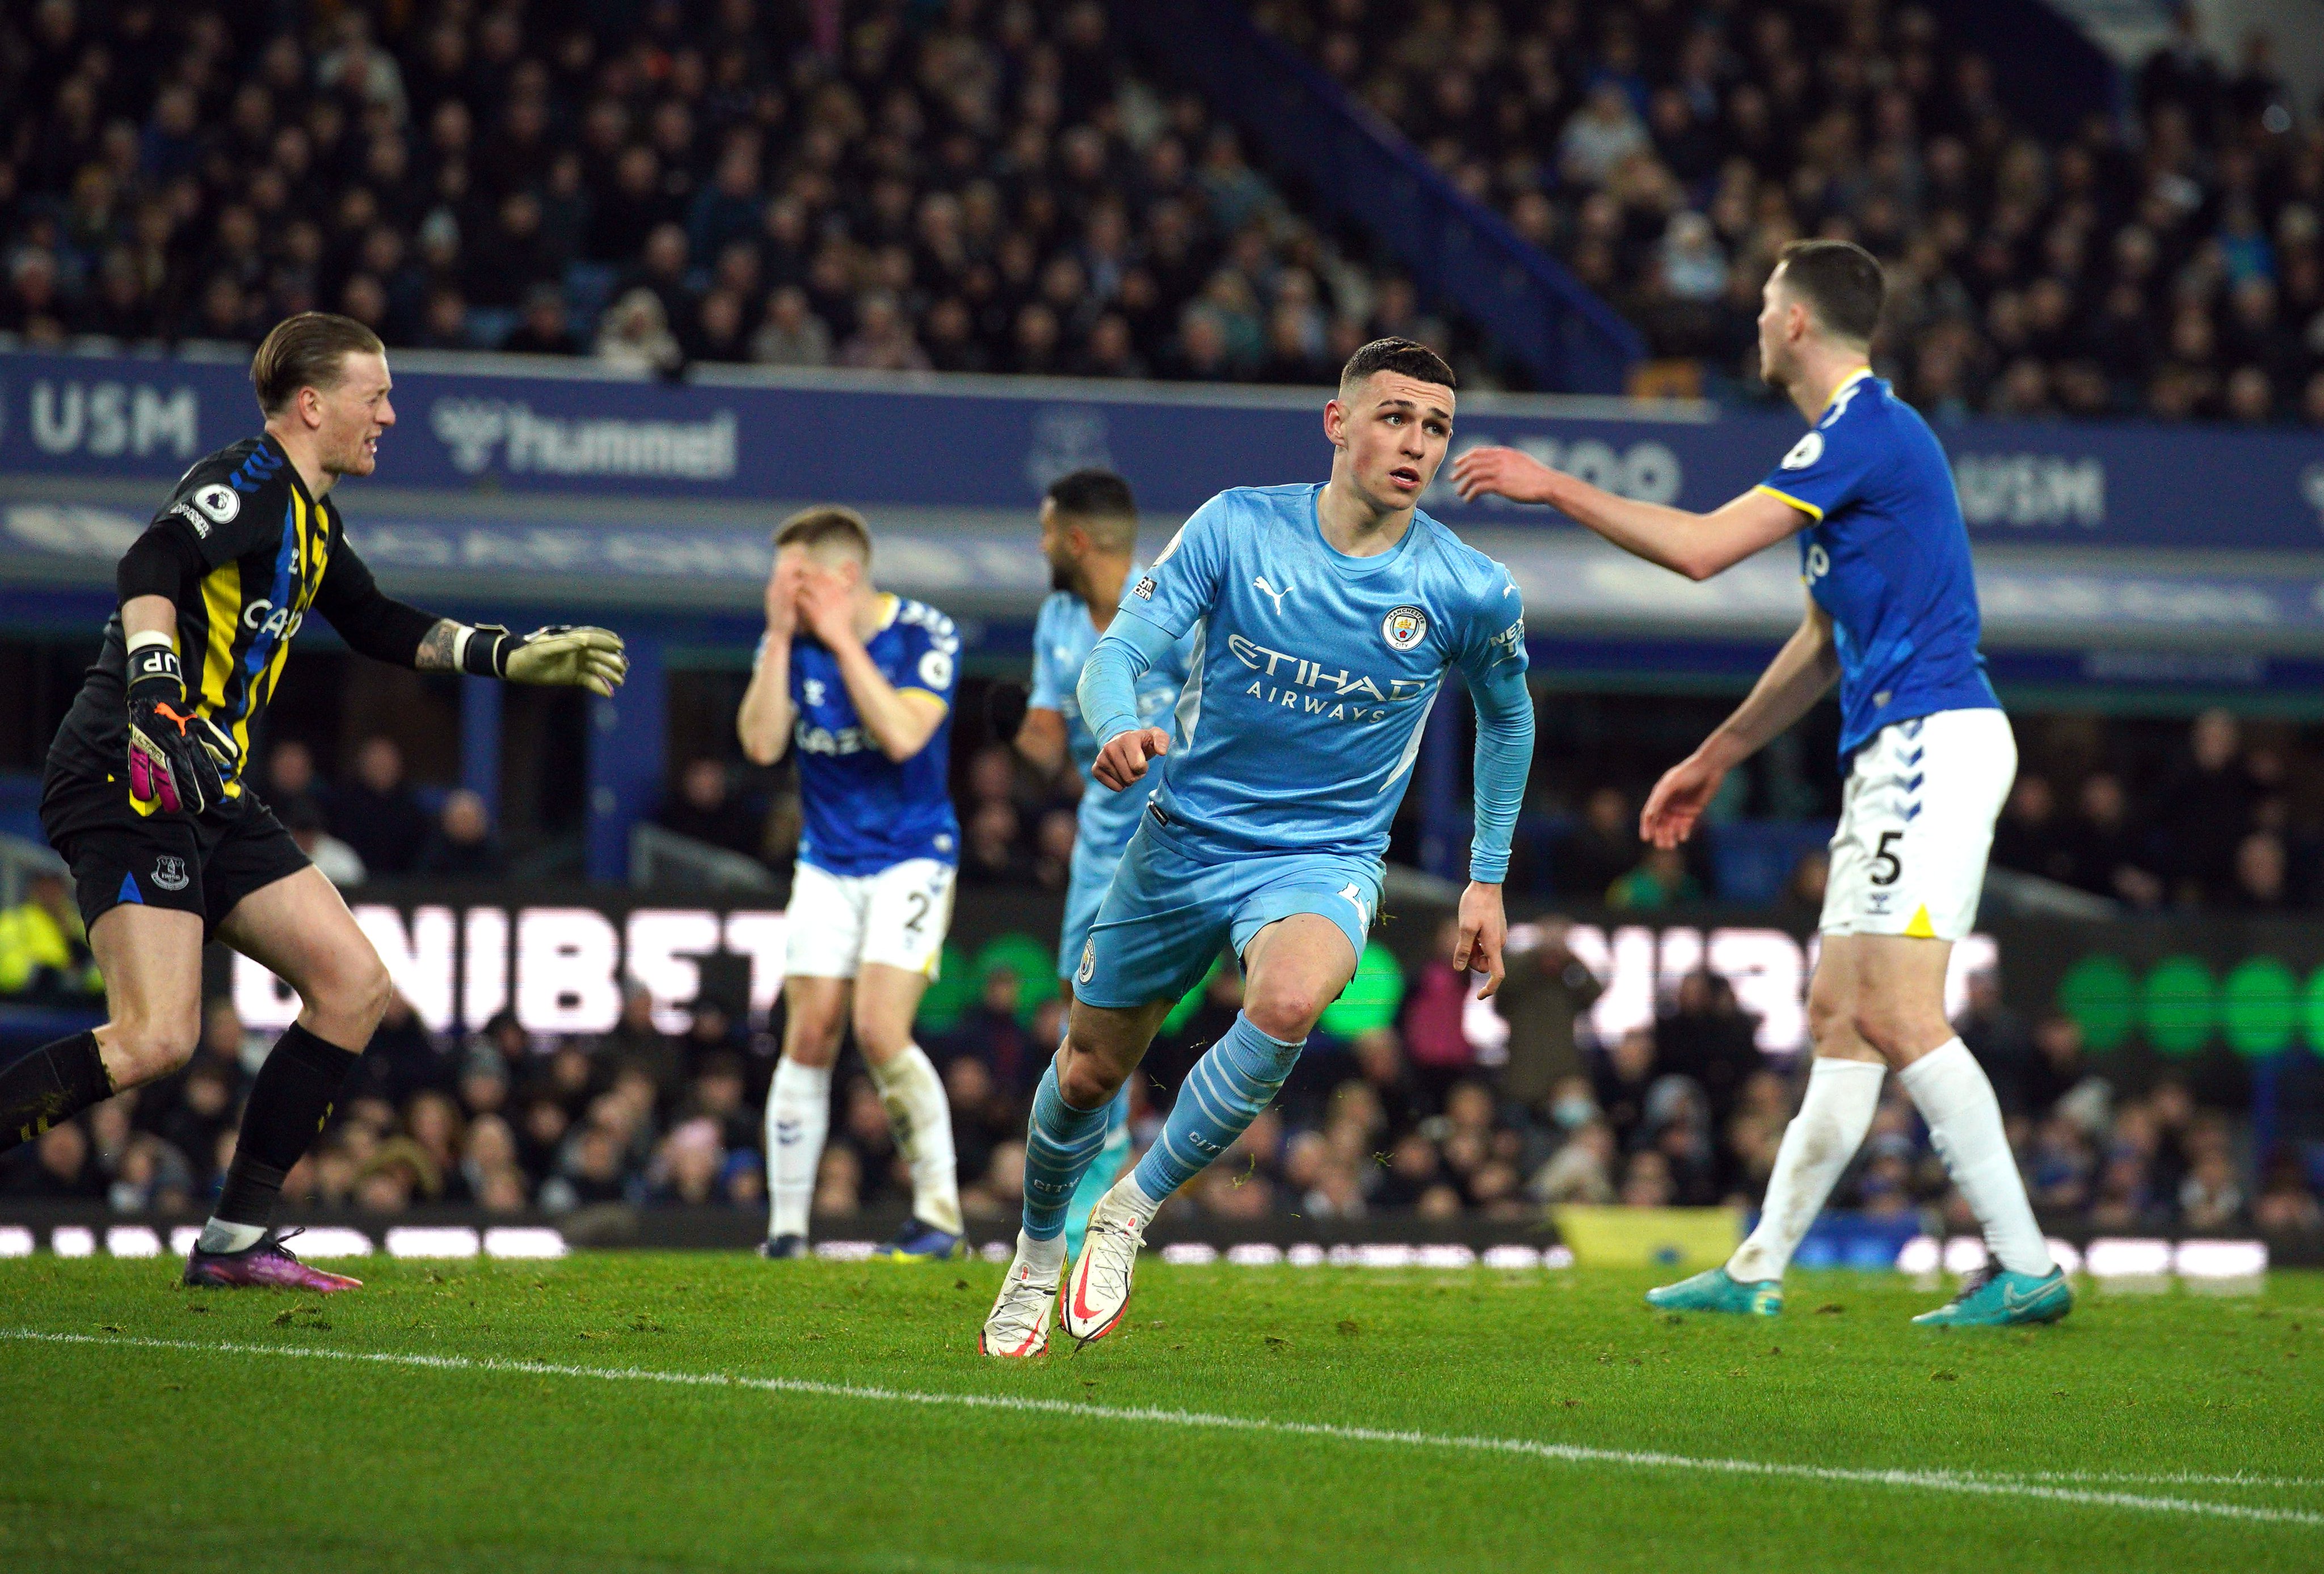 Everton 0-1 Manchester City Highlights: Manchester City beat Everton to extend their lead at the top to six points; VAR inconsistency continues as Everton were denied a clear penalty